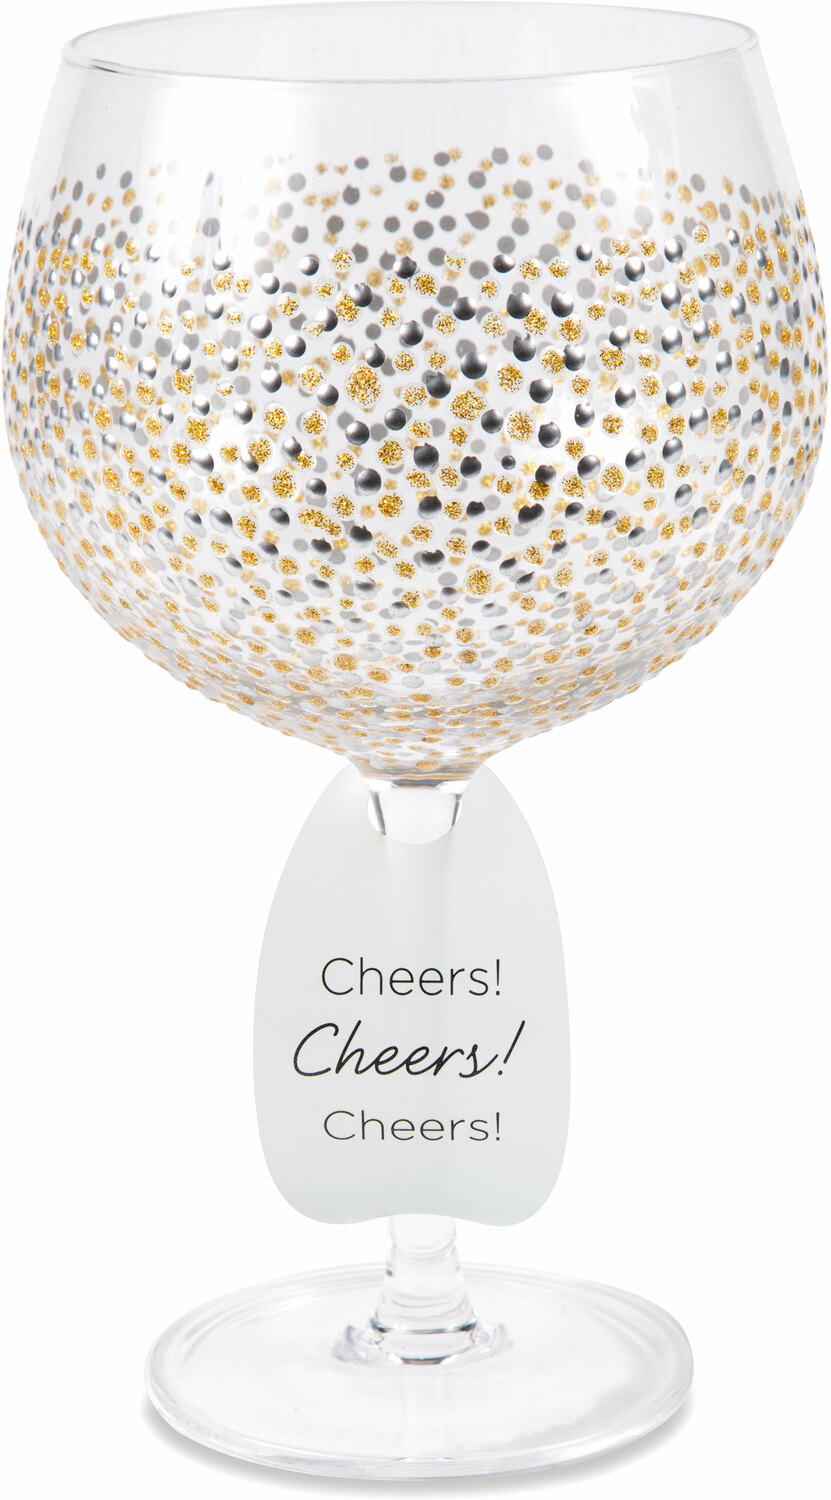 Gold & Silver Dots by Sunny by Sue - Gold & Silver Dots - 24 oz Hand Decorated Glass